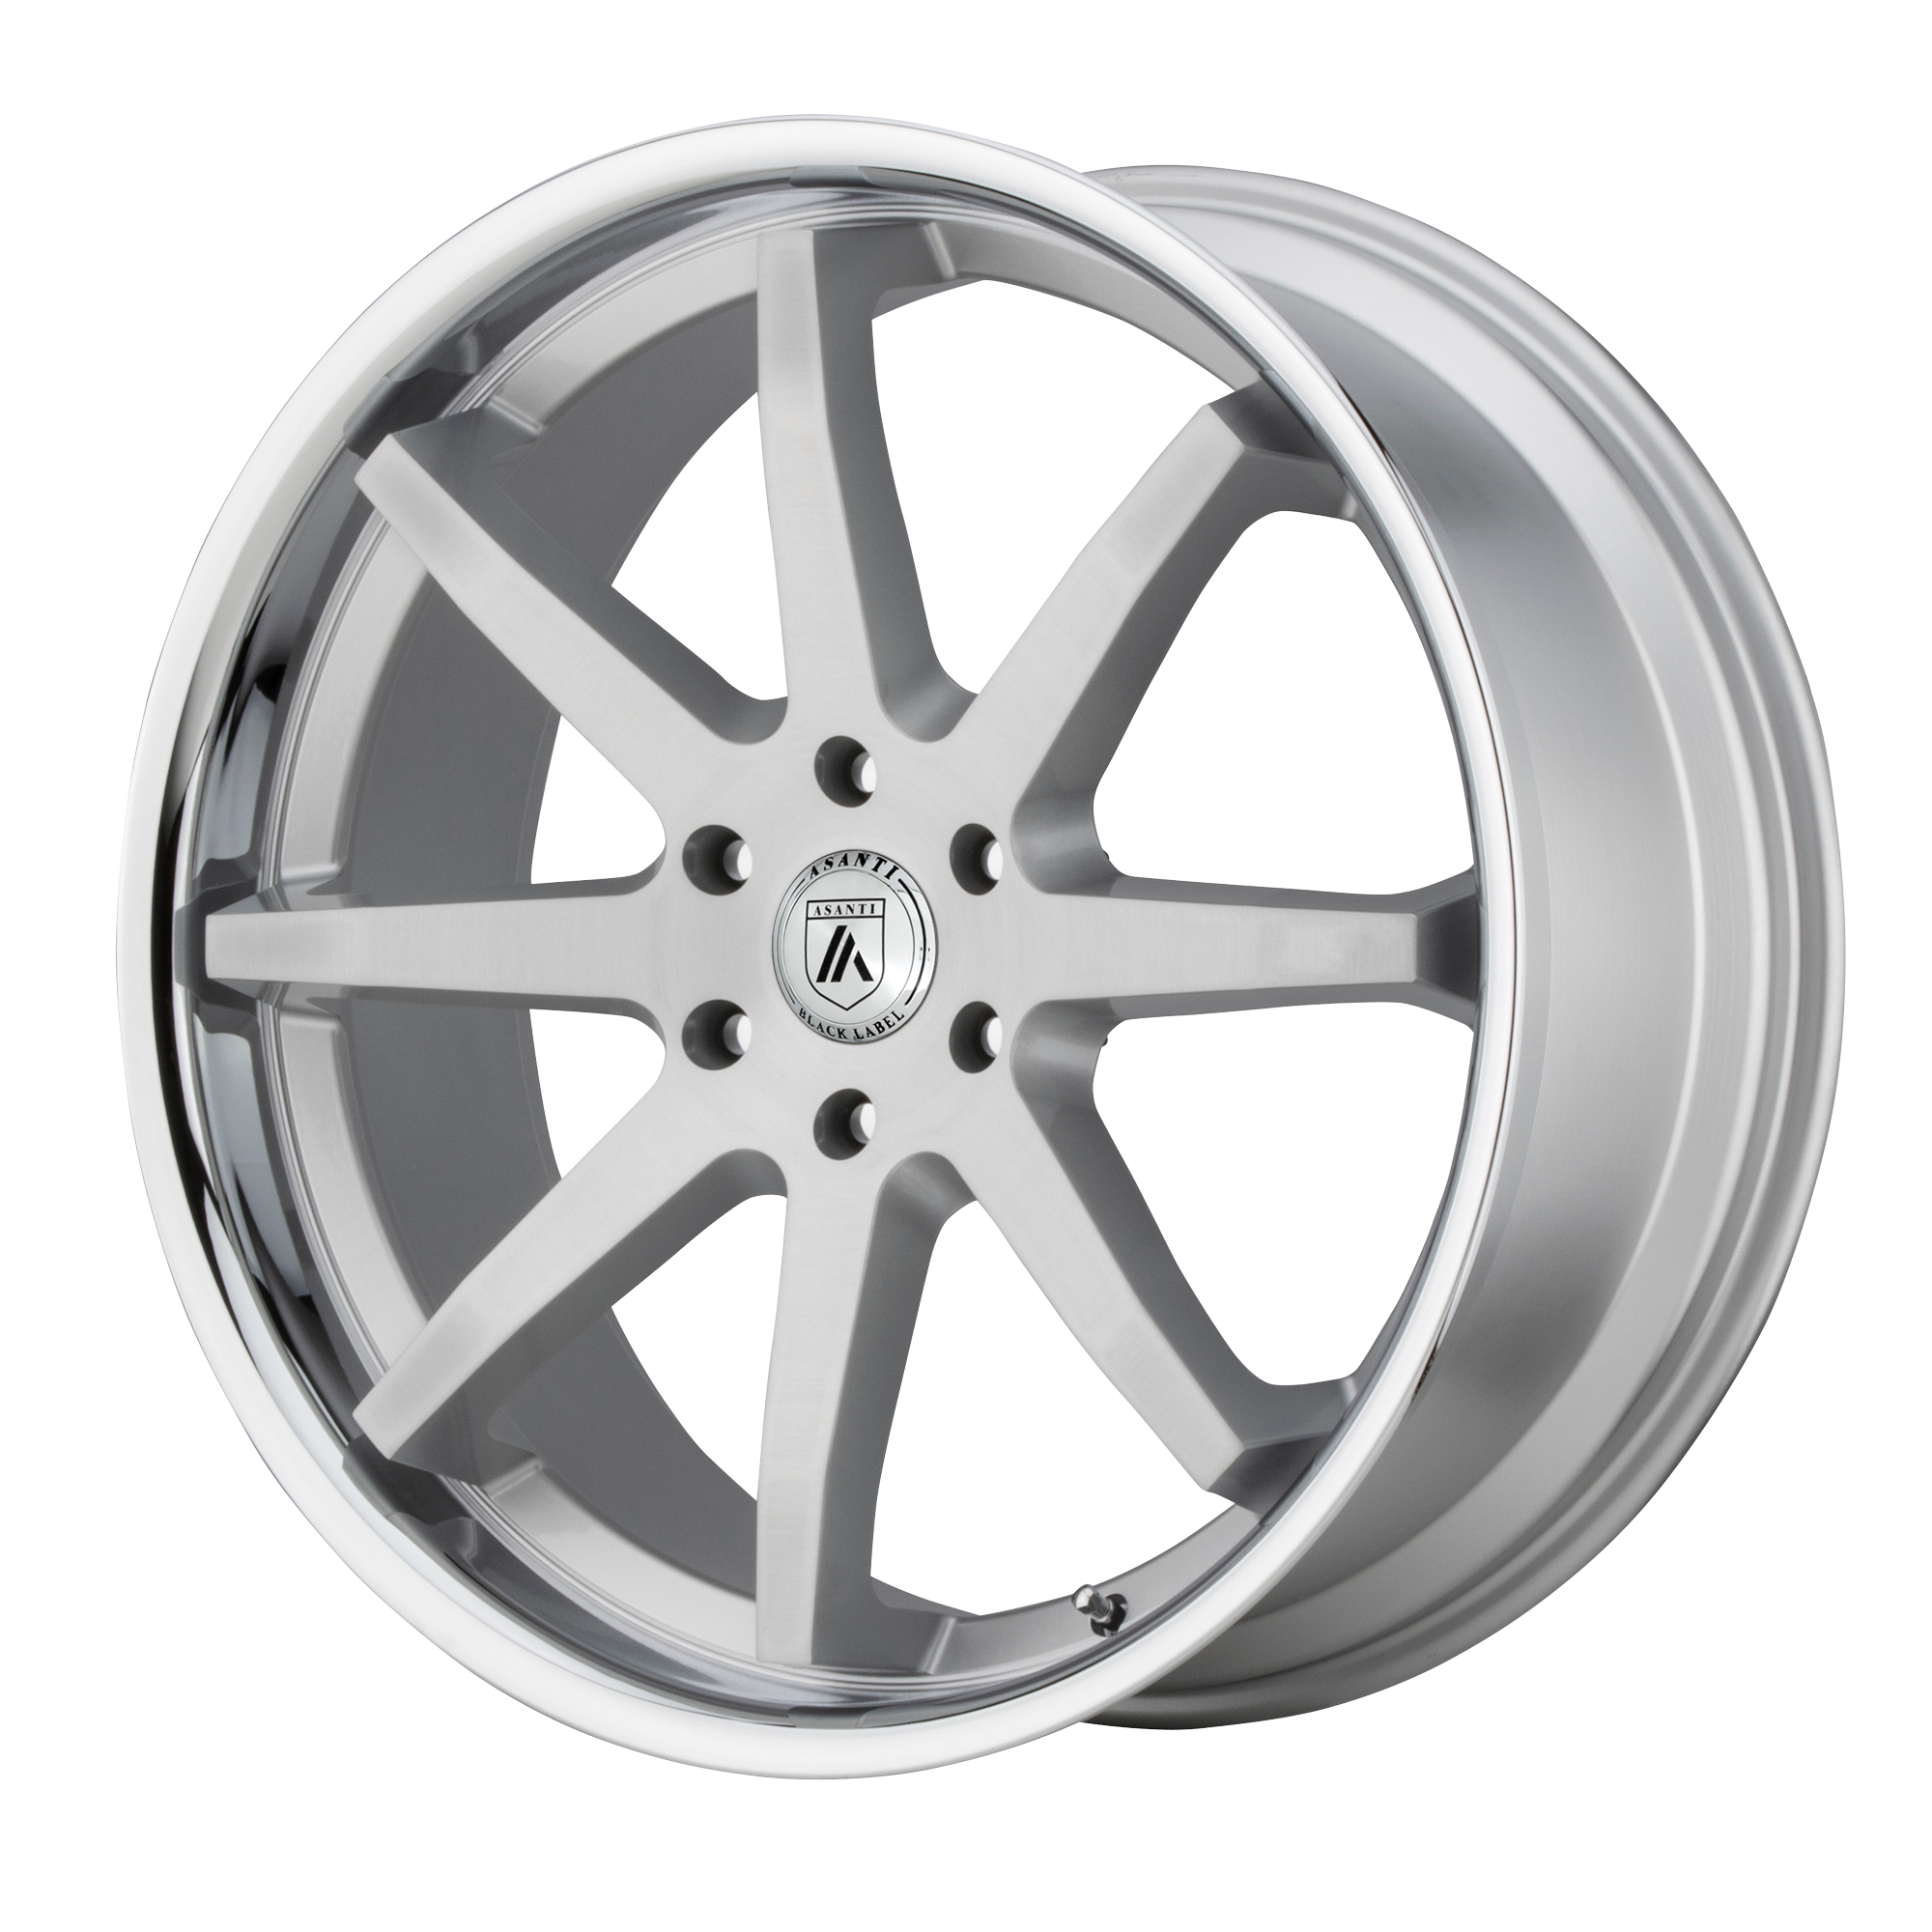 KAISER 22x9.5 6x139.70 BRUSHED SILVER W/ CHROME LIP (30 mm) - Tires and Engine Performance